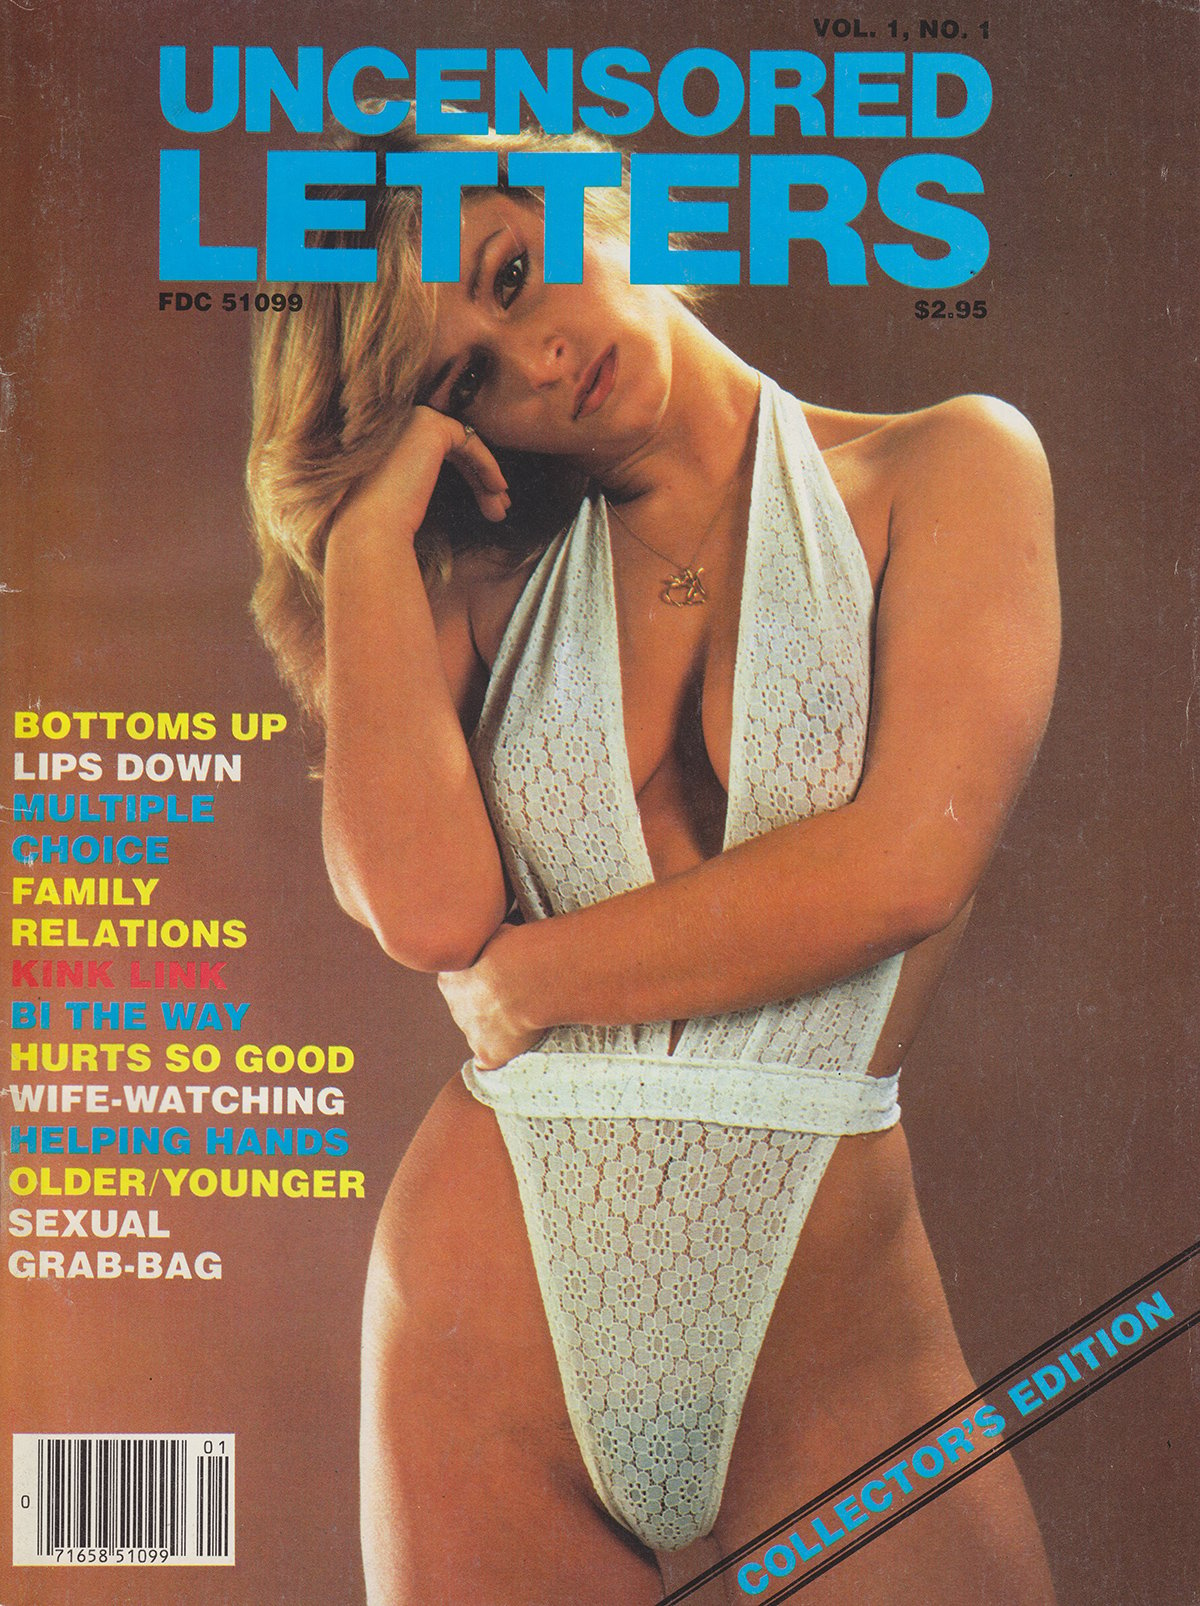 Uncensored Letters Vol. 1 # 1, 1983 magazine back issue Uncensored Letters magizine back copy 